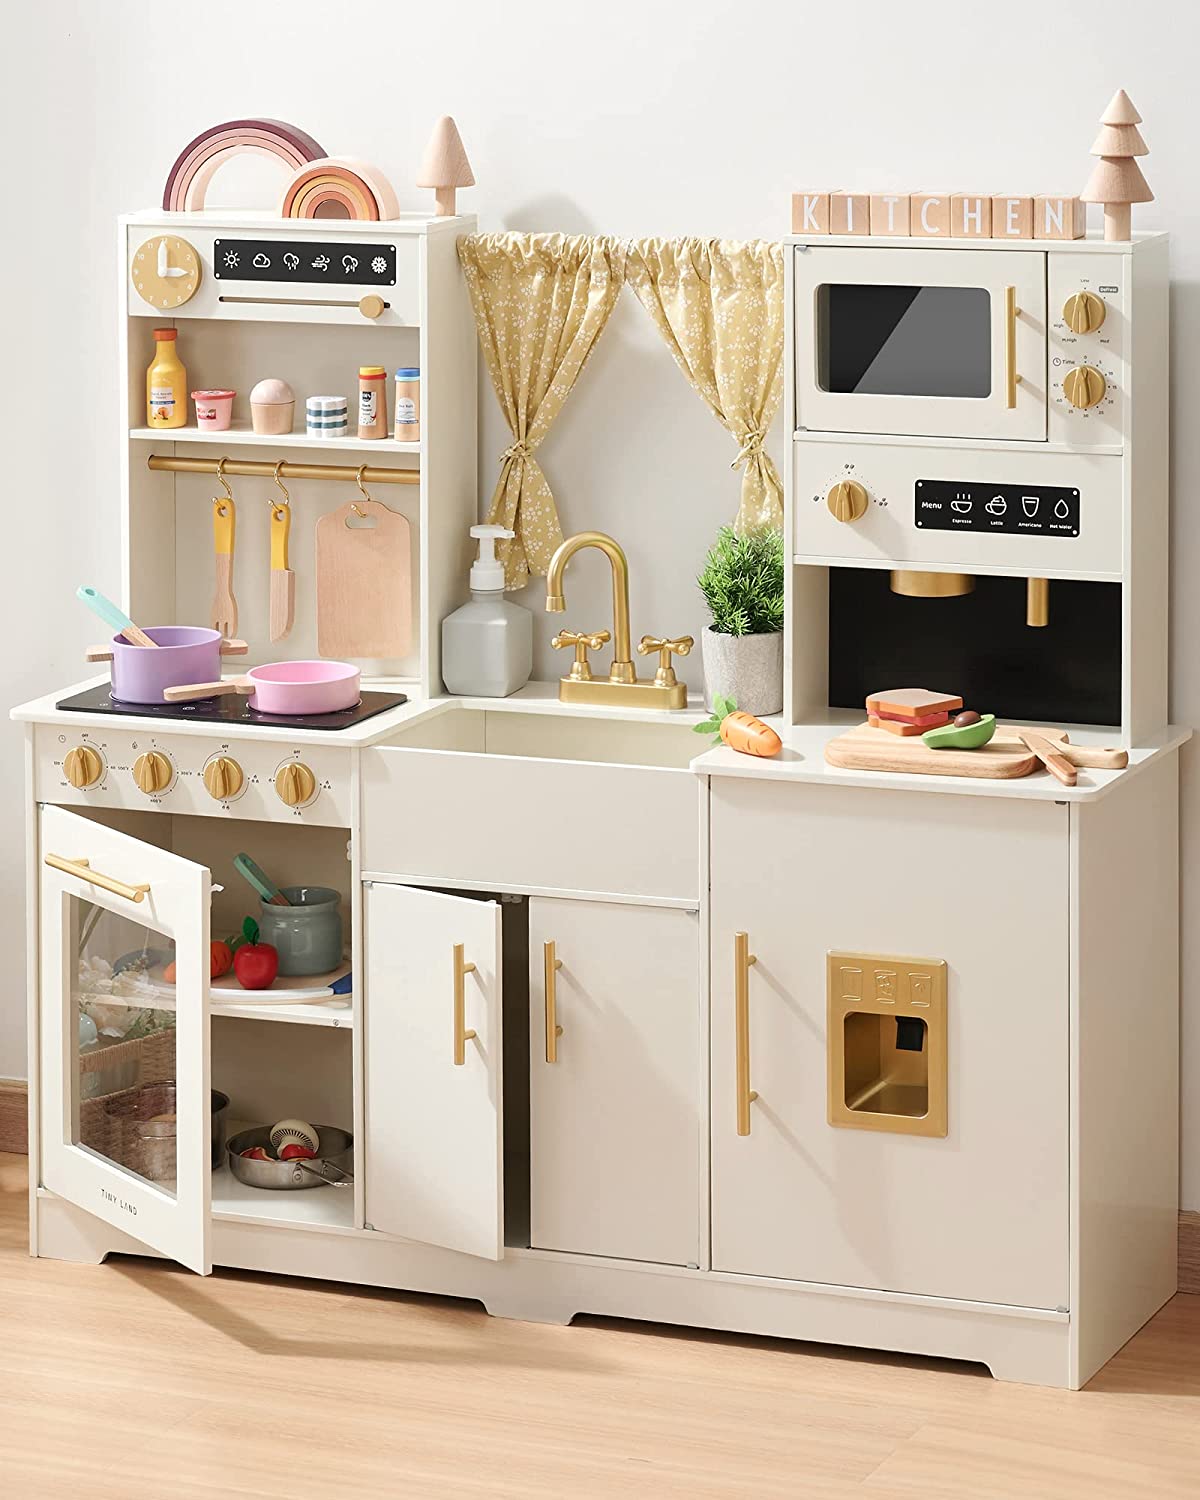 Tiny Land New Modern Play Kitchen for Kids, Toy [...]